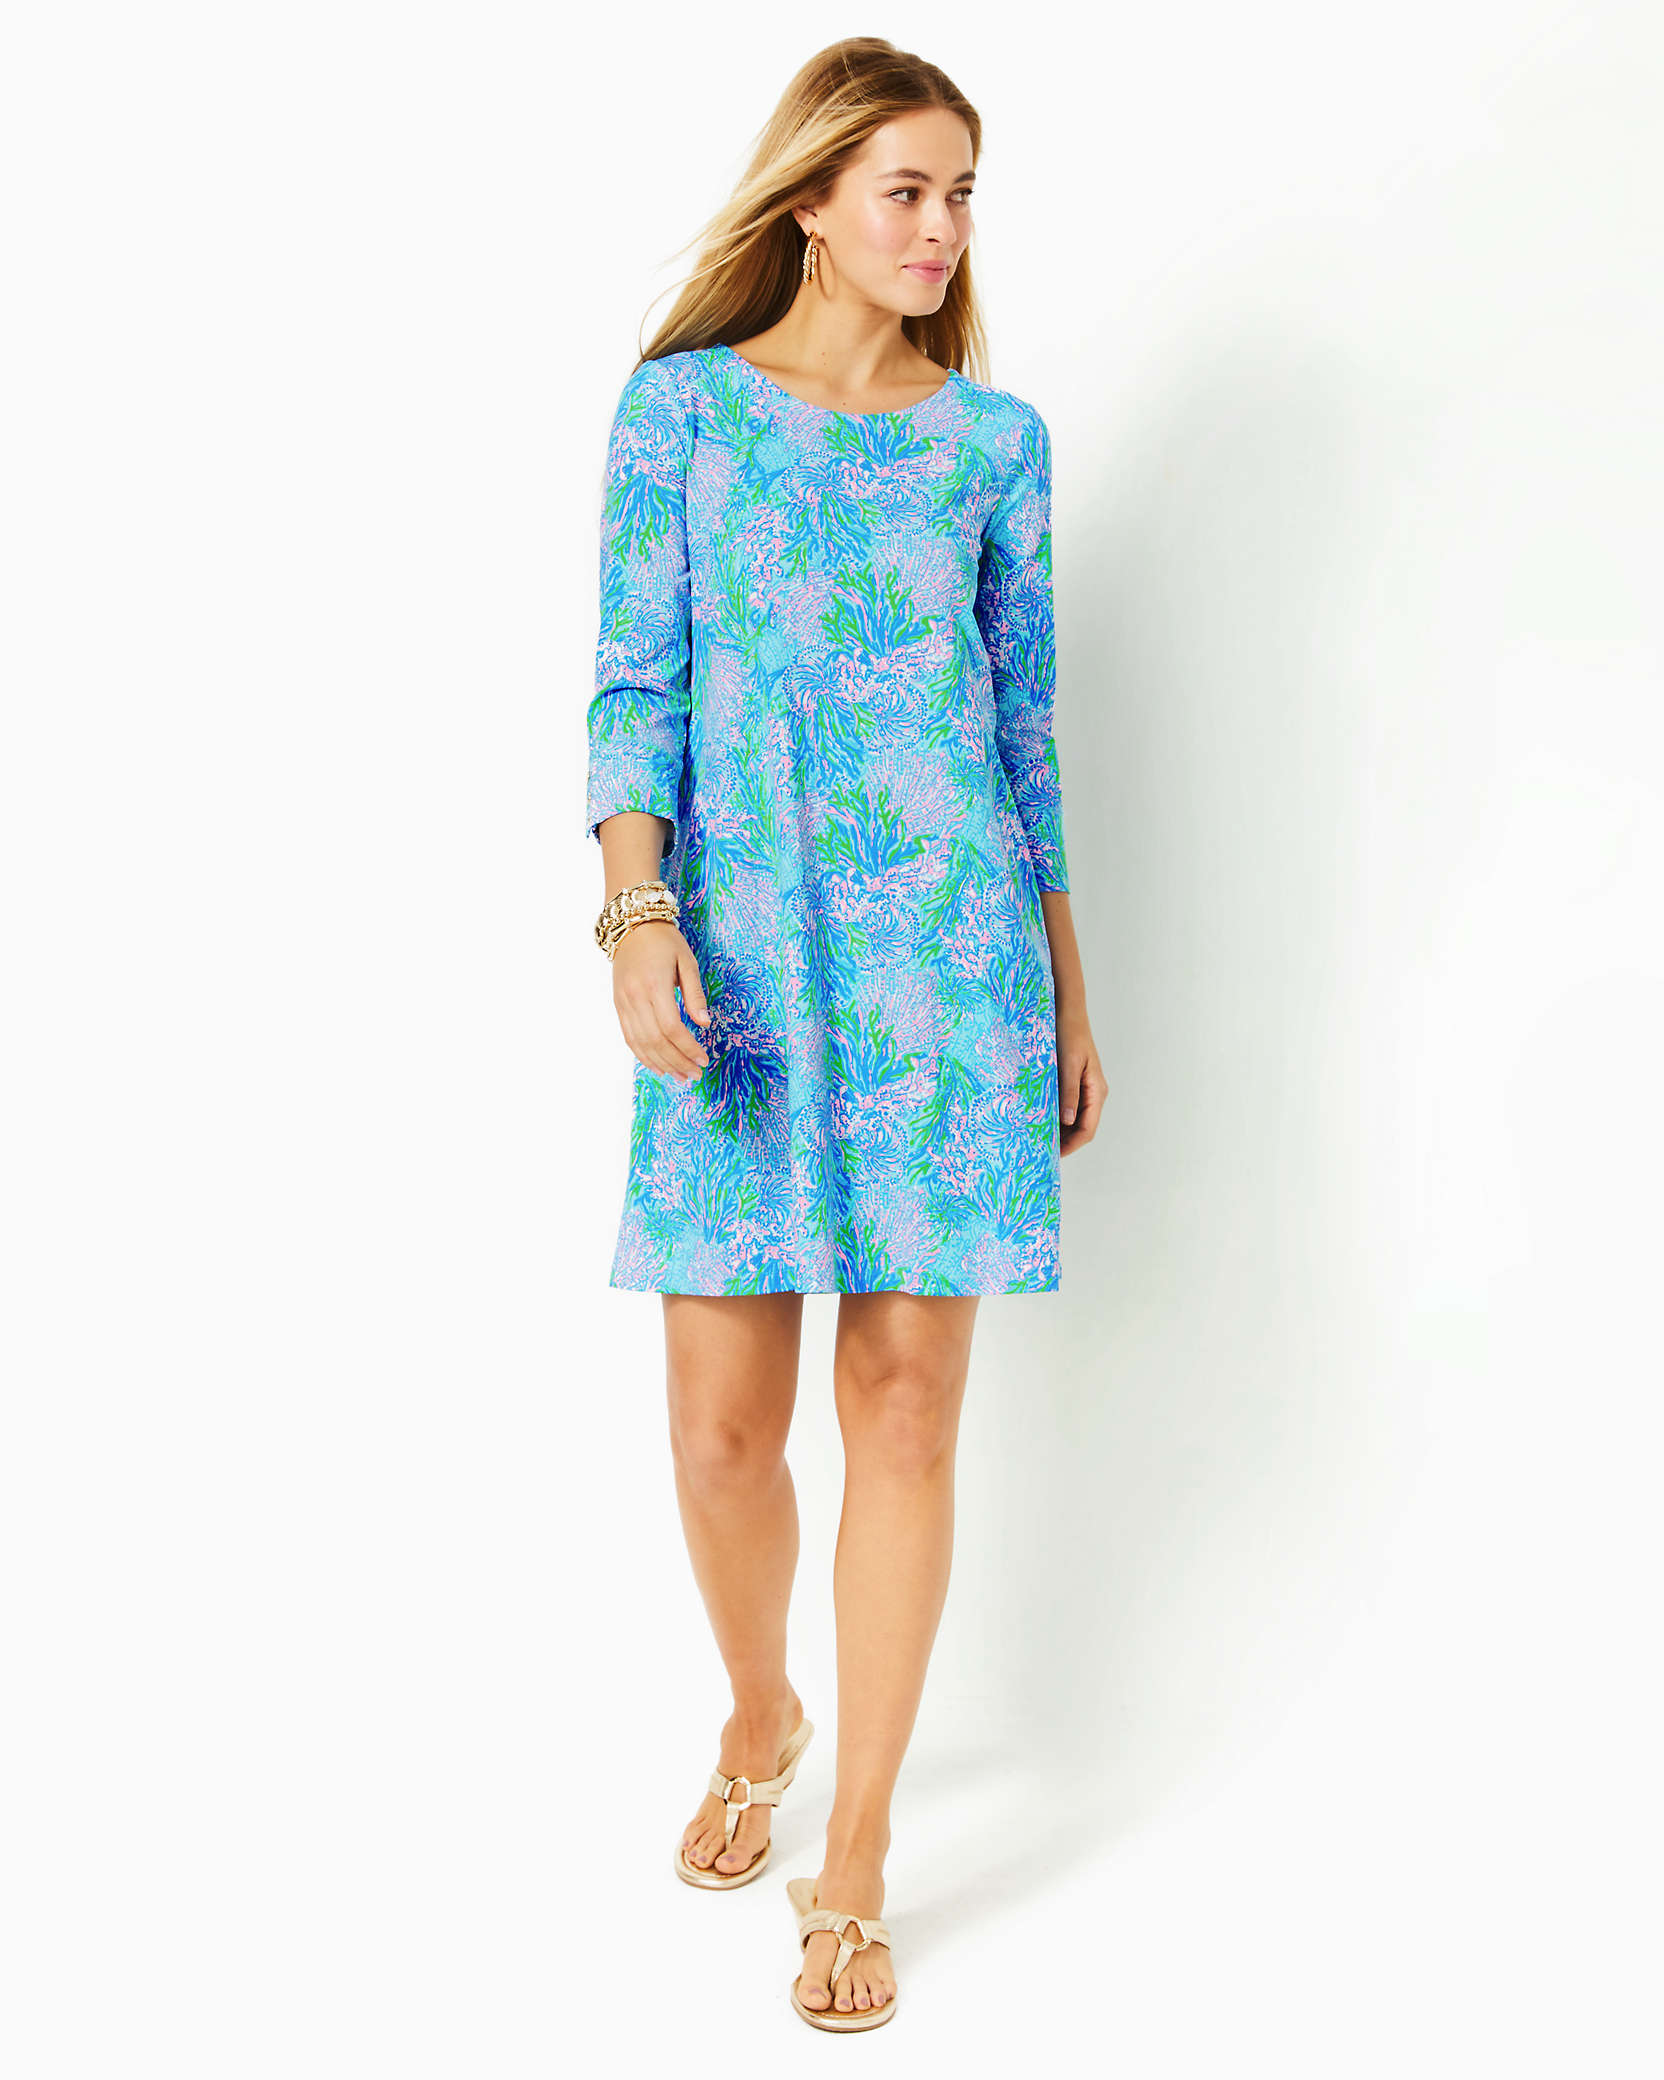 Shop Lilly Pulitzer Upf 50+ Solia Chillylilly Dress In Las Olas Aqua Strong Current Sea